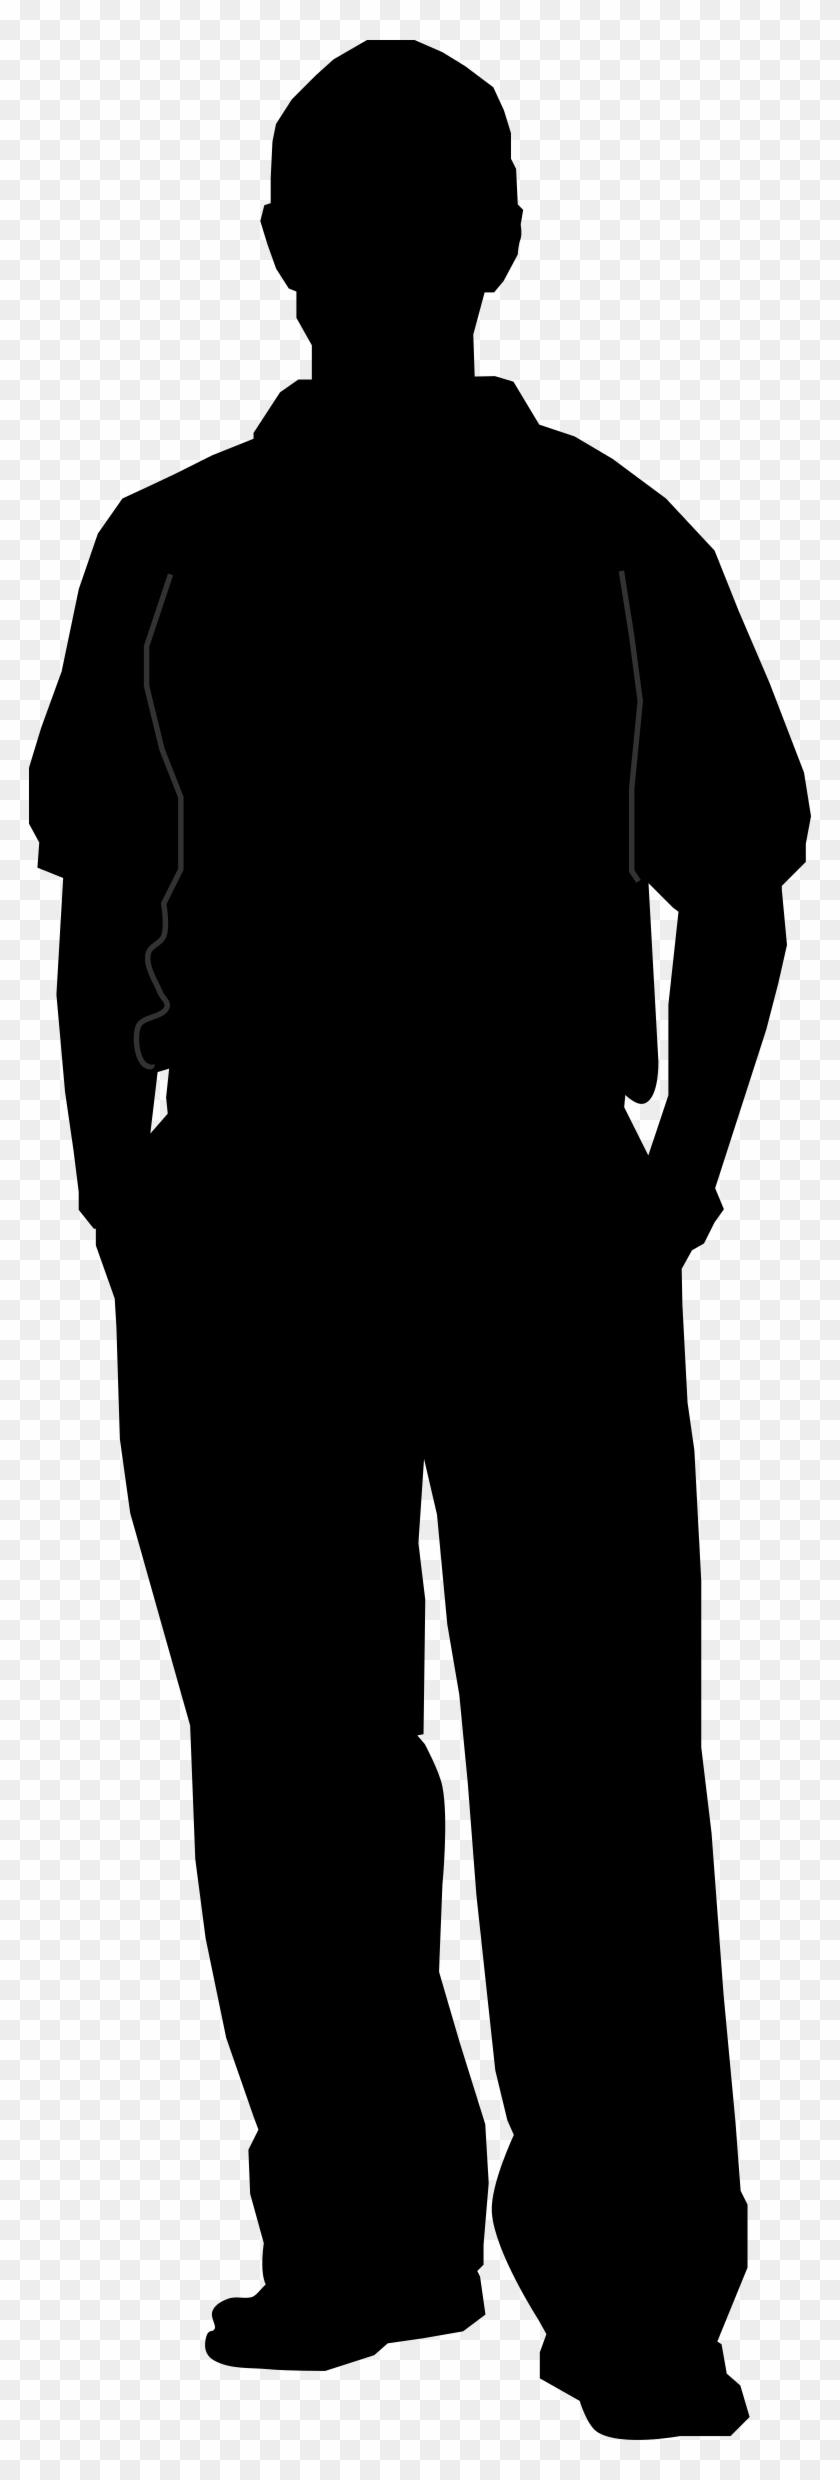 Man - Security Guard Silhouette Png #869072